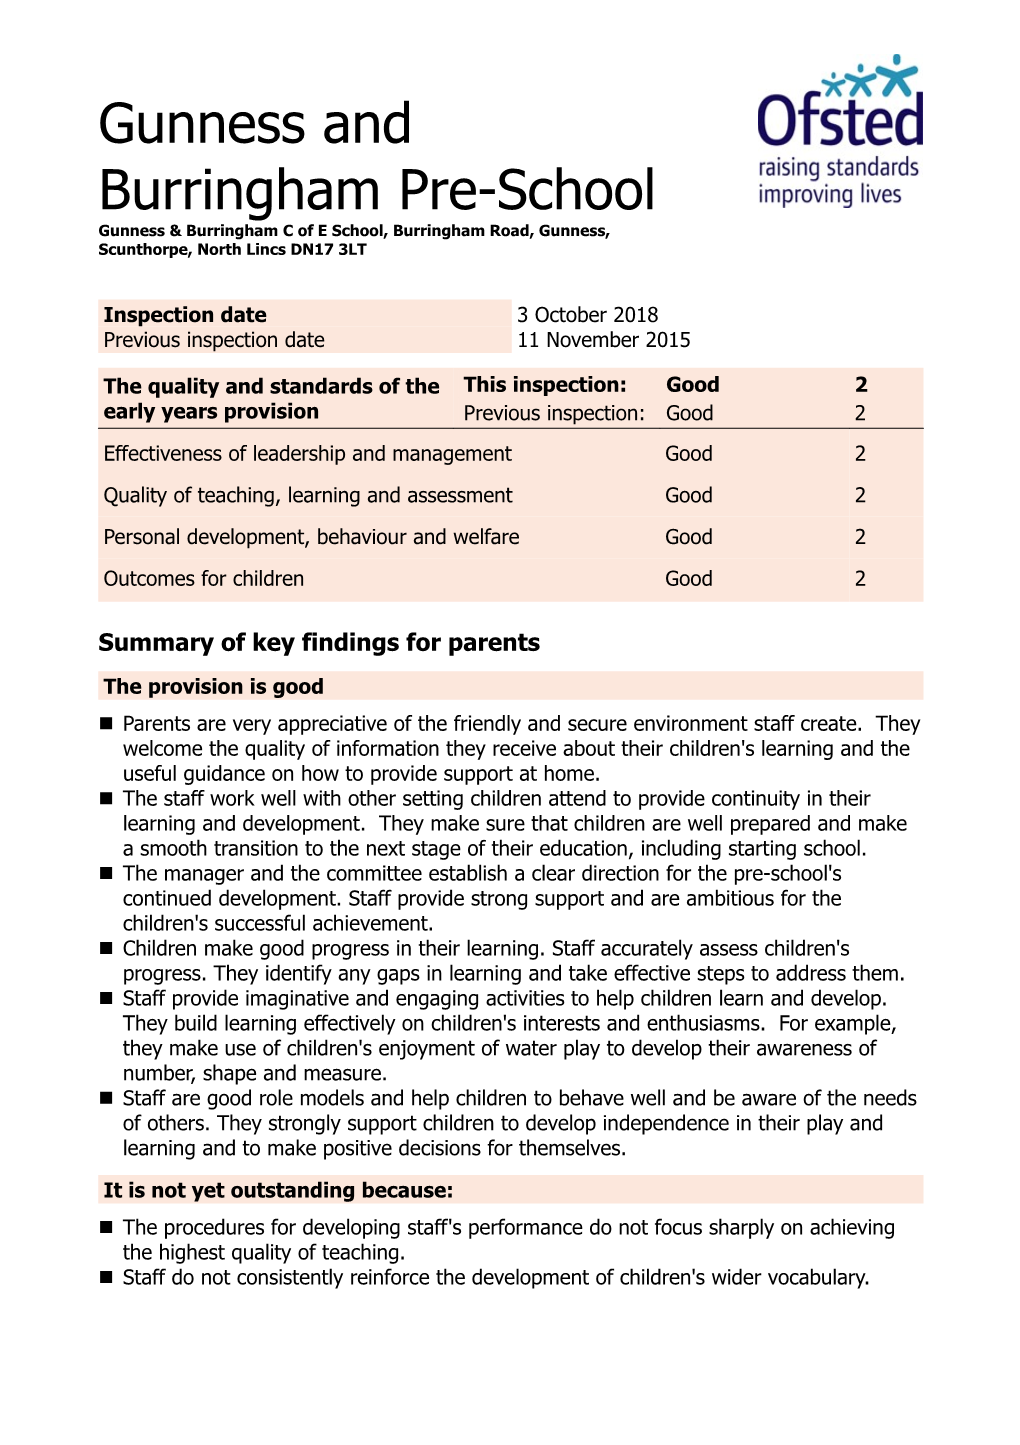 Ofsted Report 2018 [PDF]